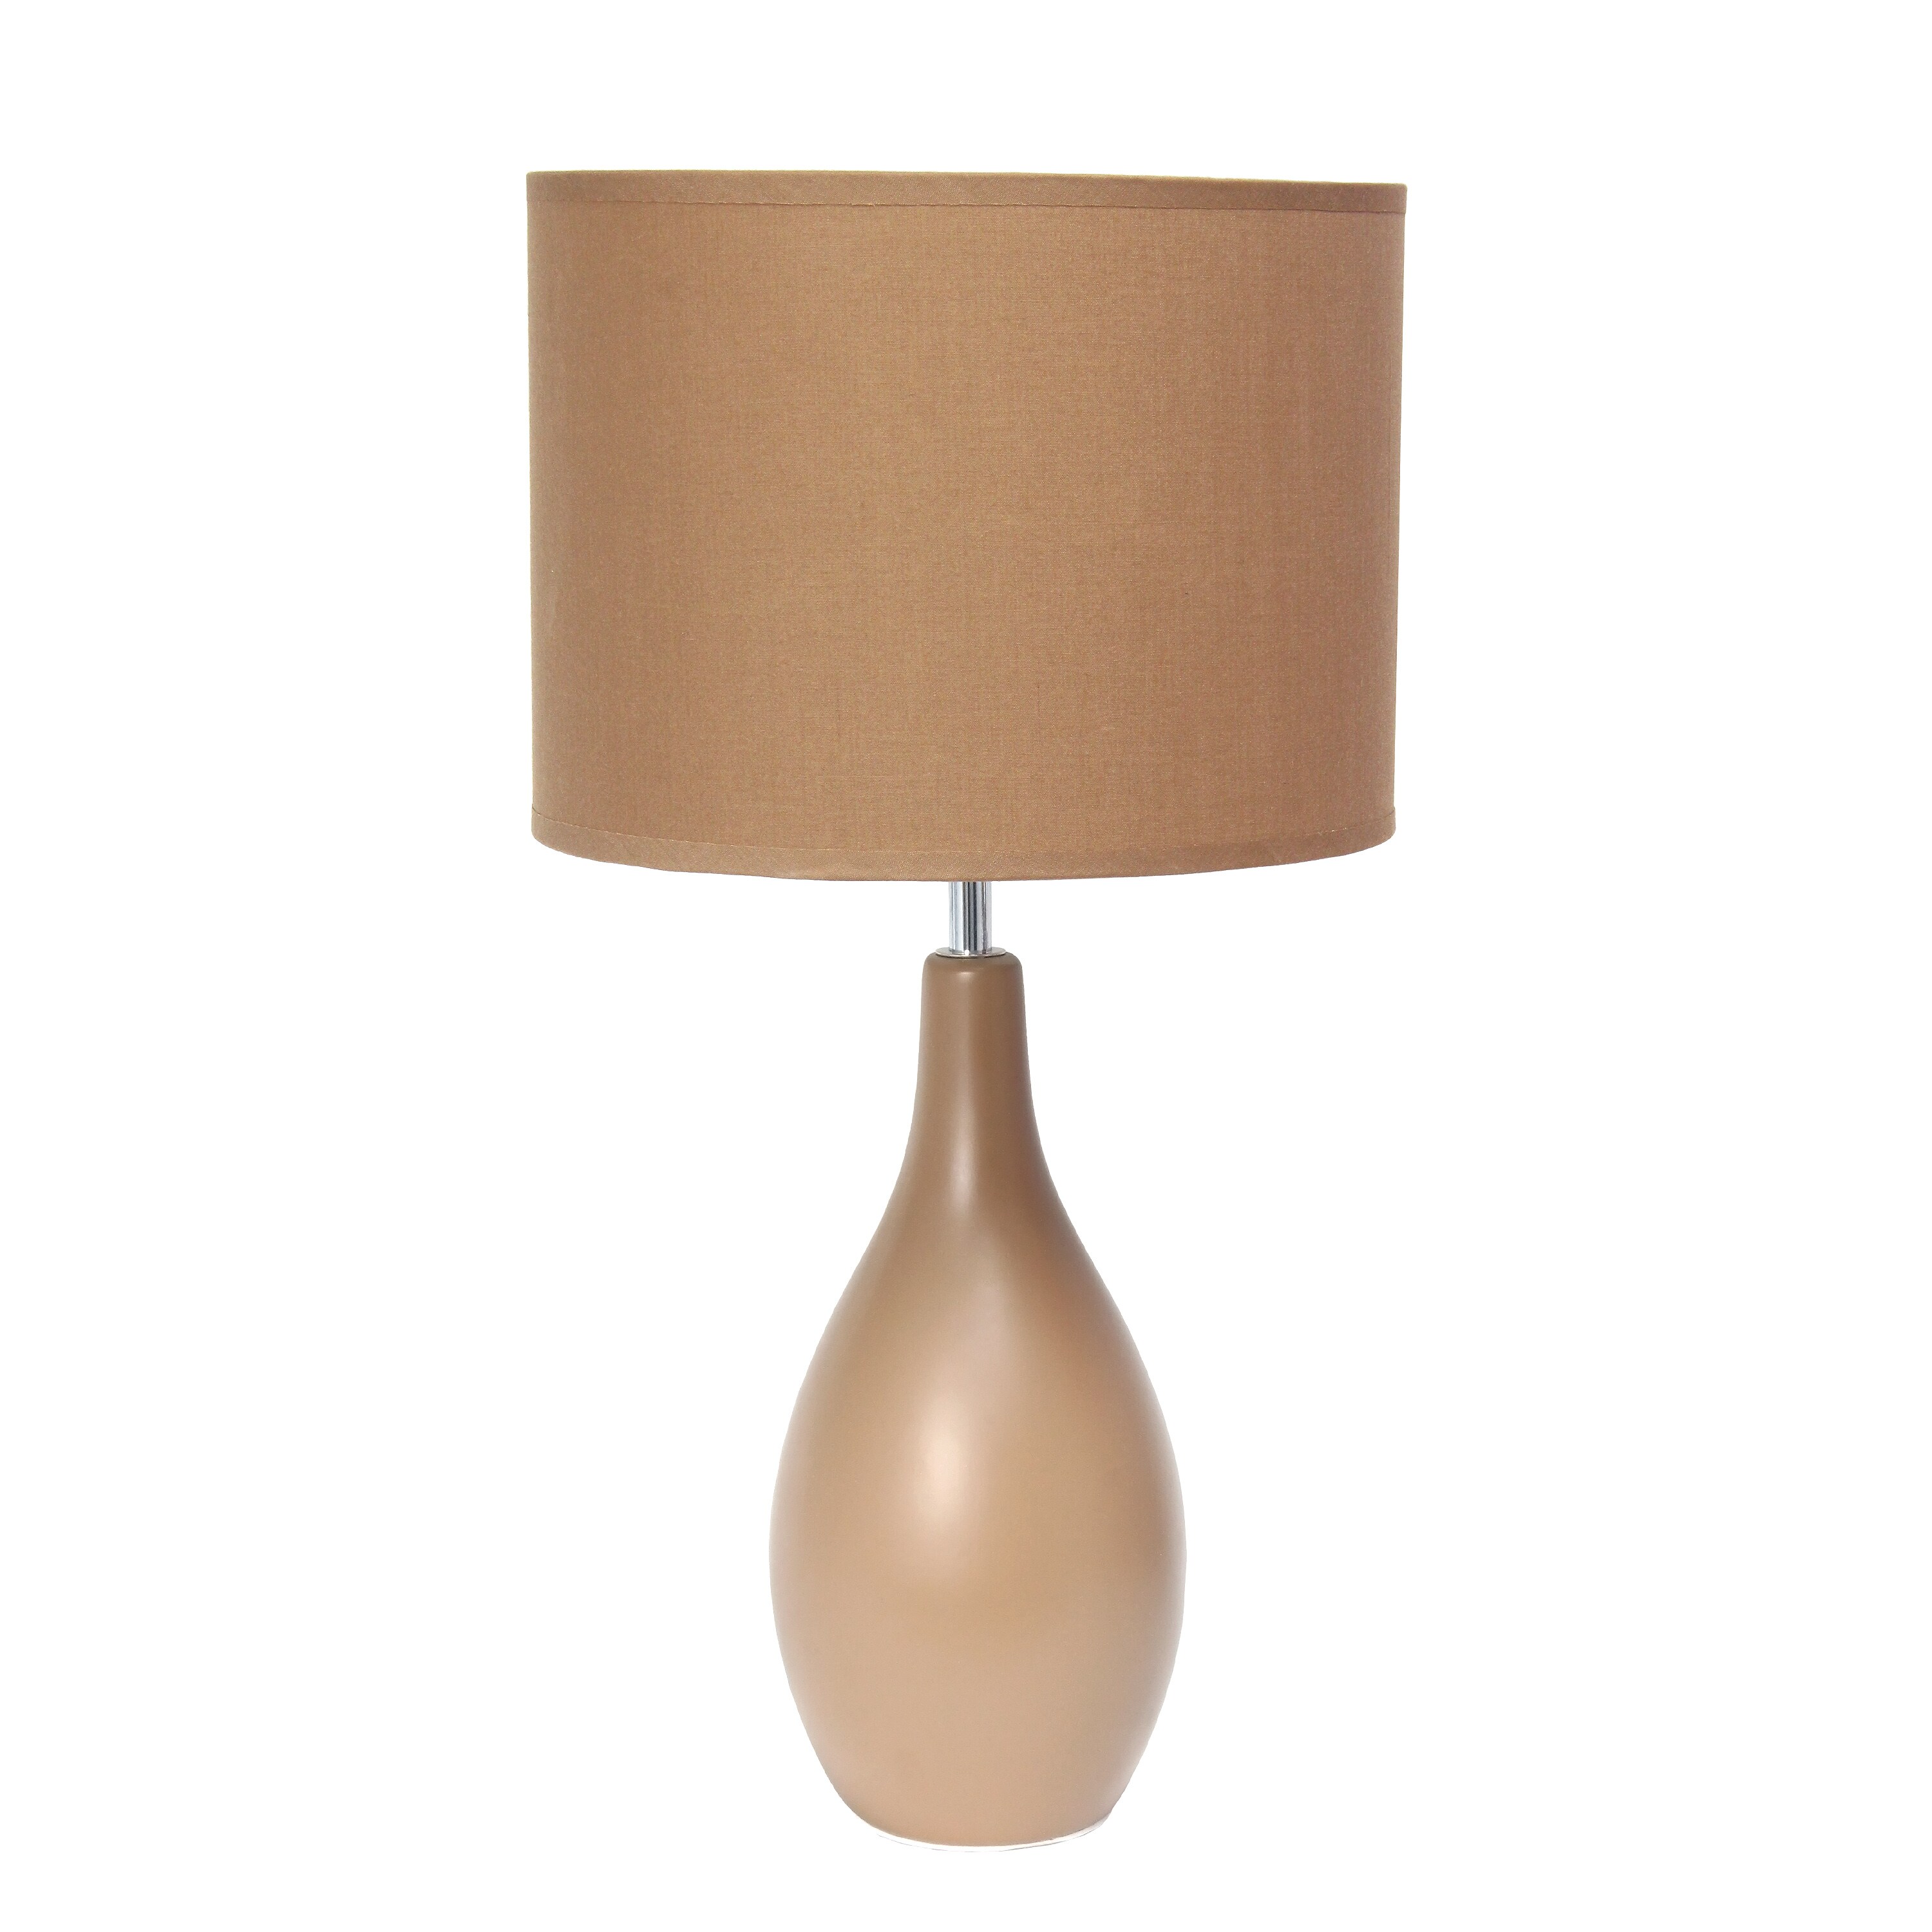 Fabric Shade In The Table Lamps, Mocha Metal Table Lamp